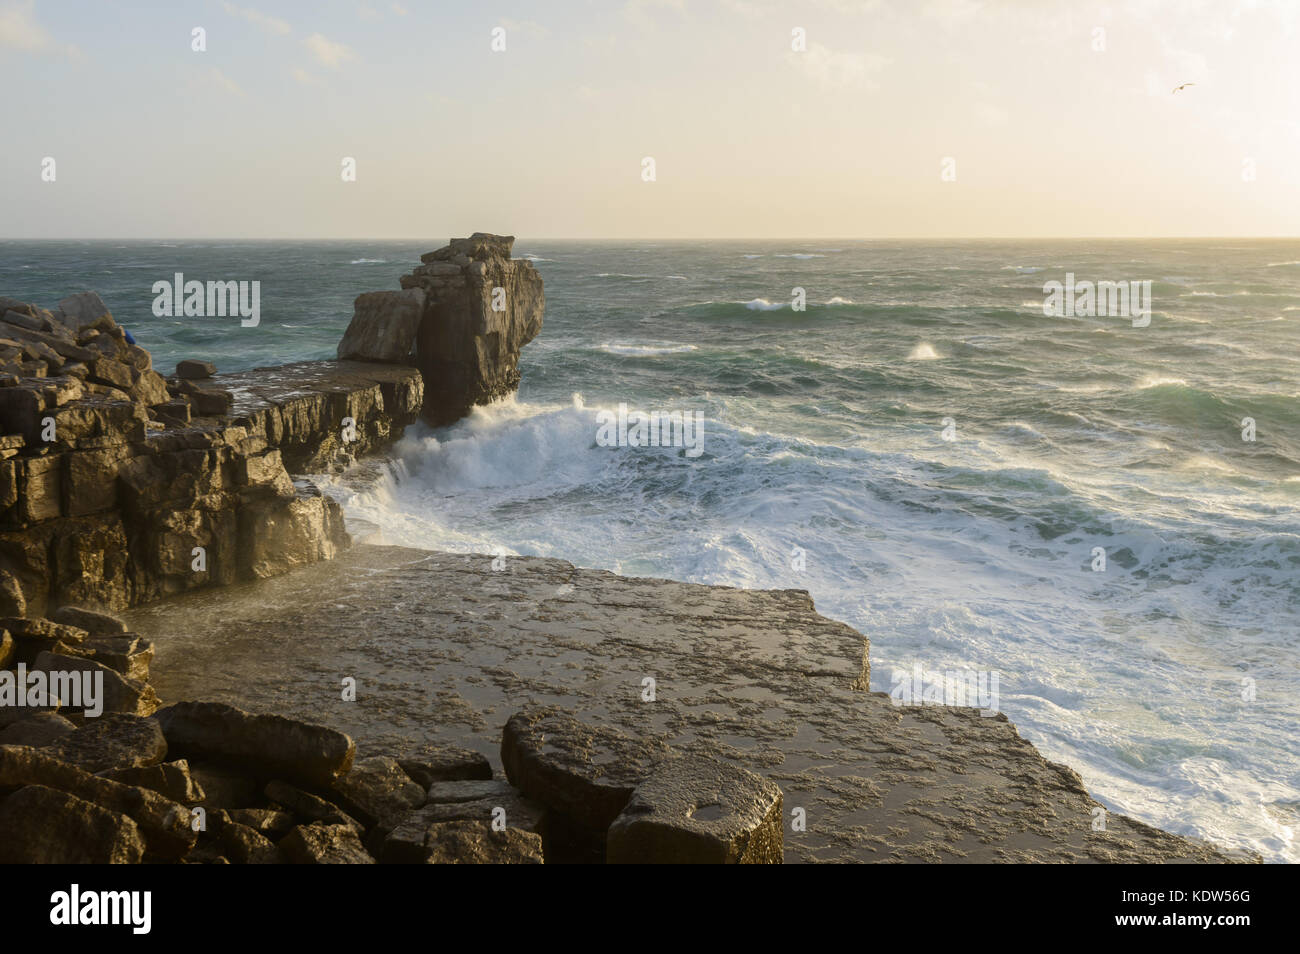 Portland Bill, Dorset. 16th Oct 2017. UK Weather. Storm Ophelia hits the south coast with huge waves and high winds. Portland Bill takes the rough conditions full on. Credit: DTNews/Live Alamy News Stock Photo